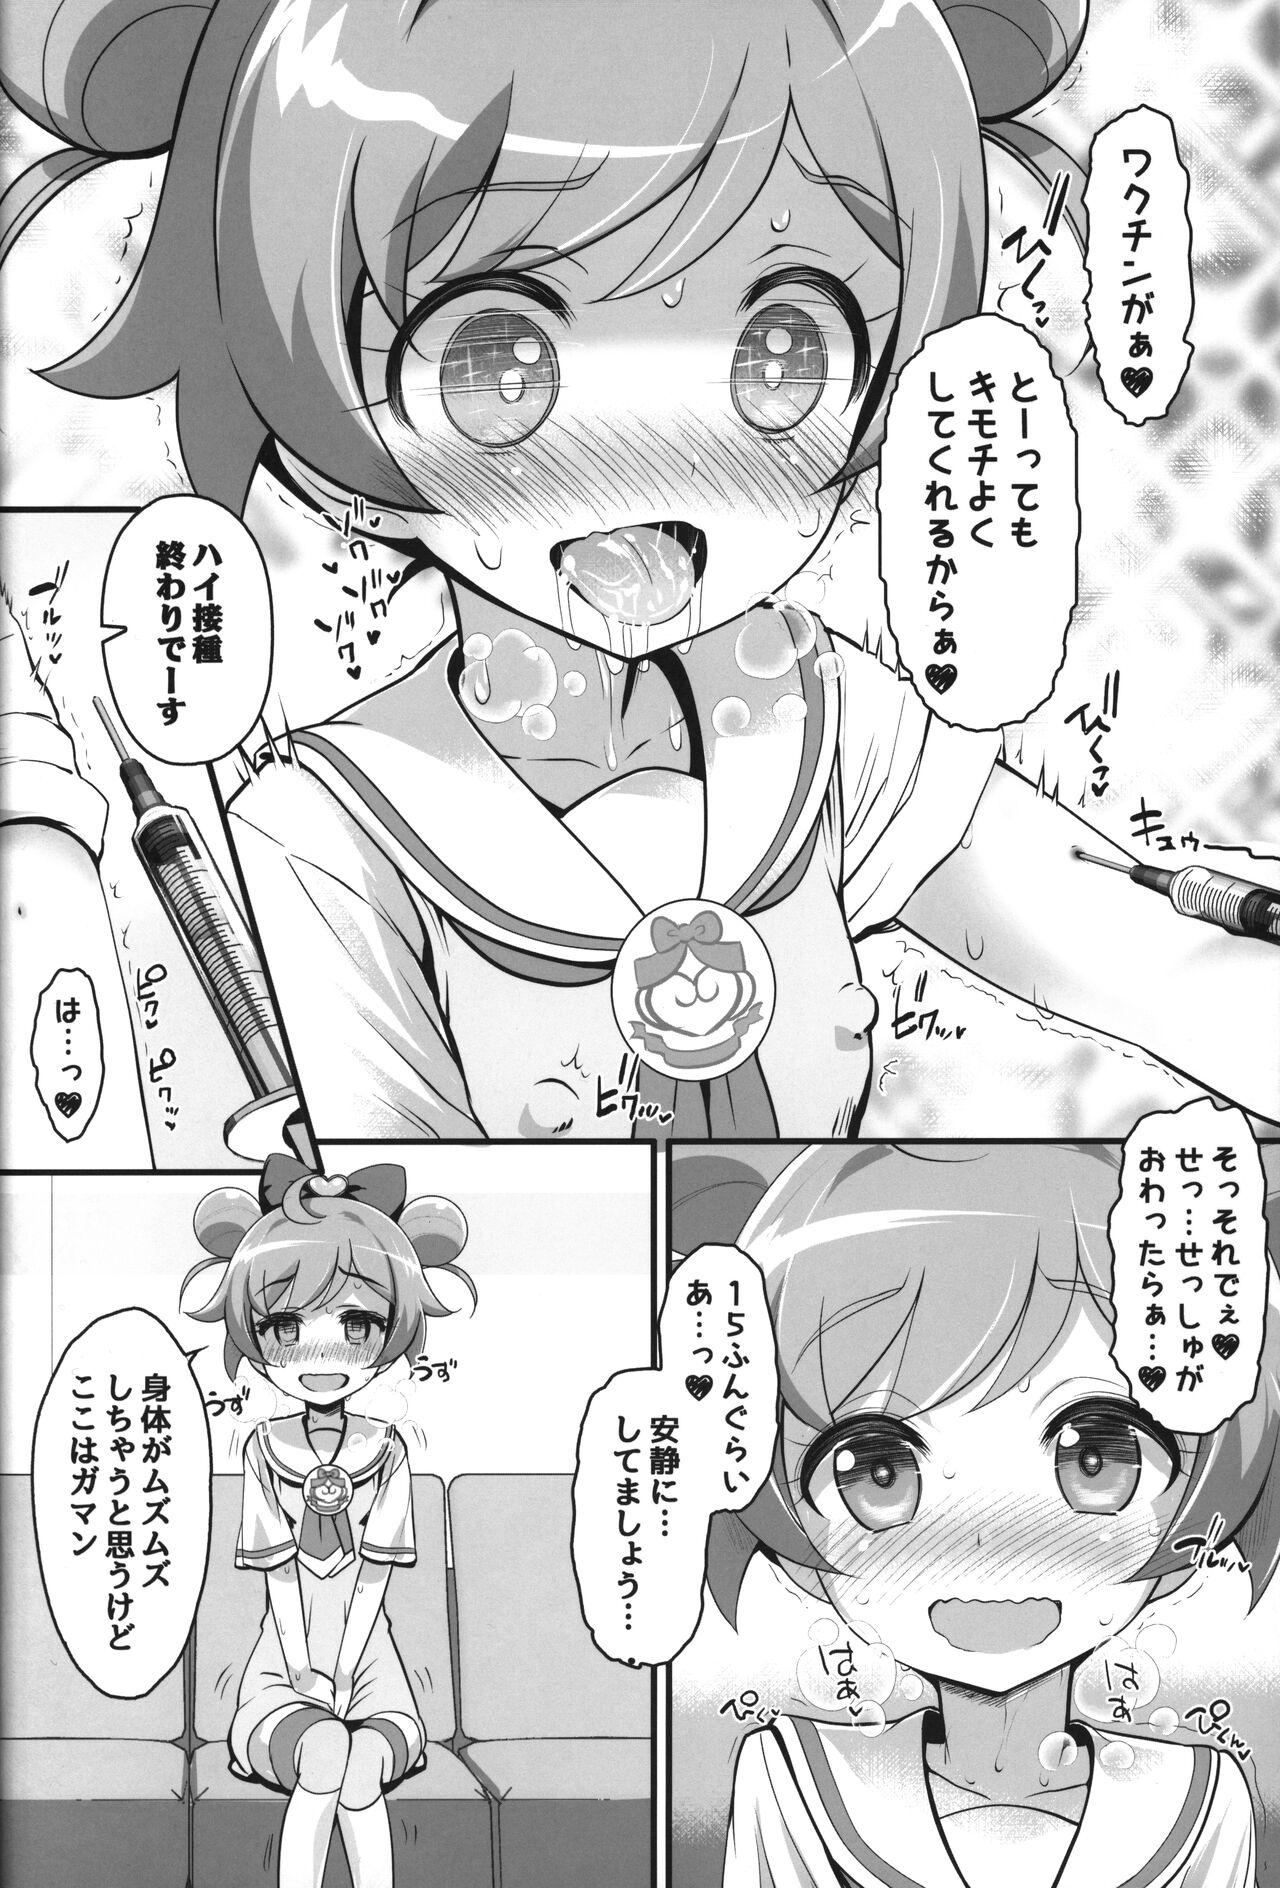 Rabo drug and drop 11 - Pripara Delicious party precure Mewkledreamy White Girl - Page 7